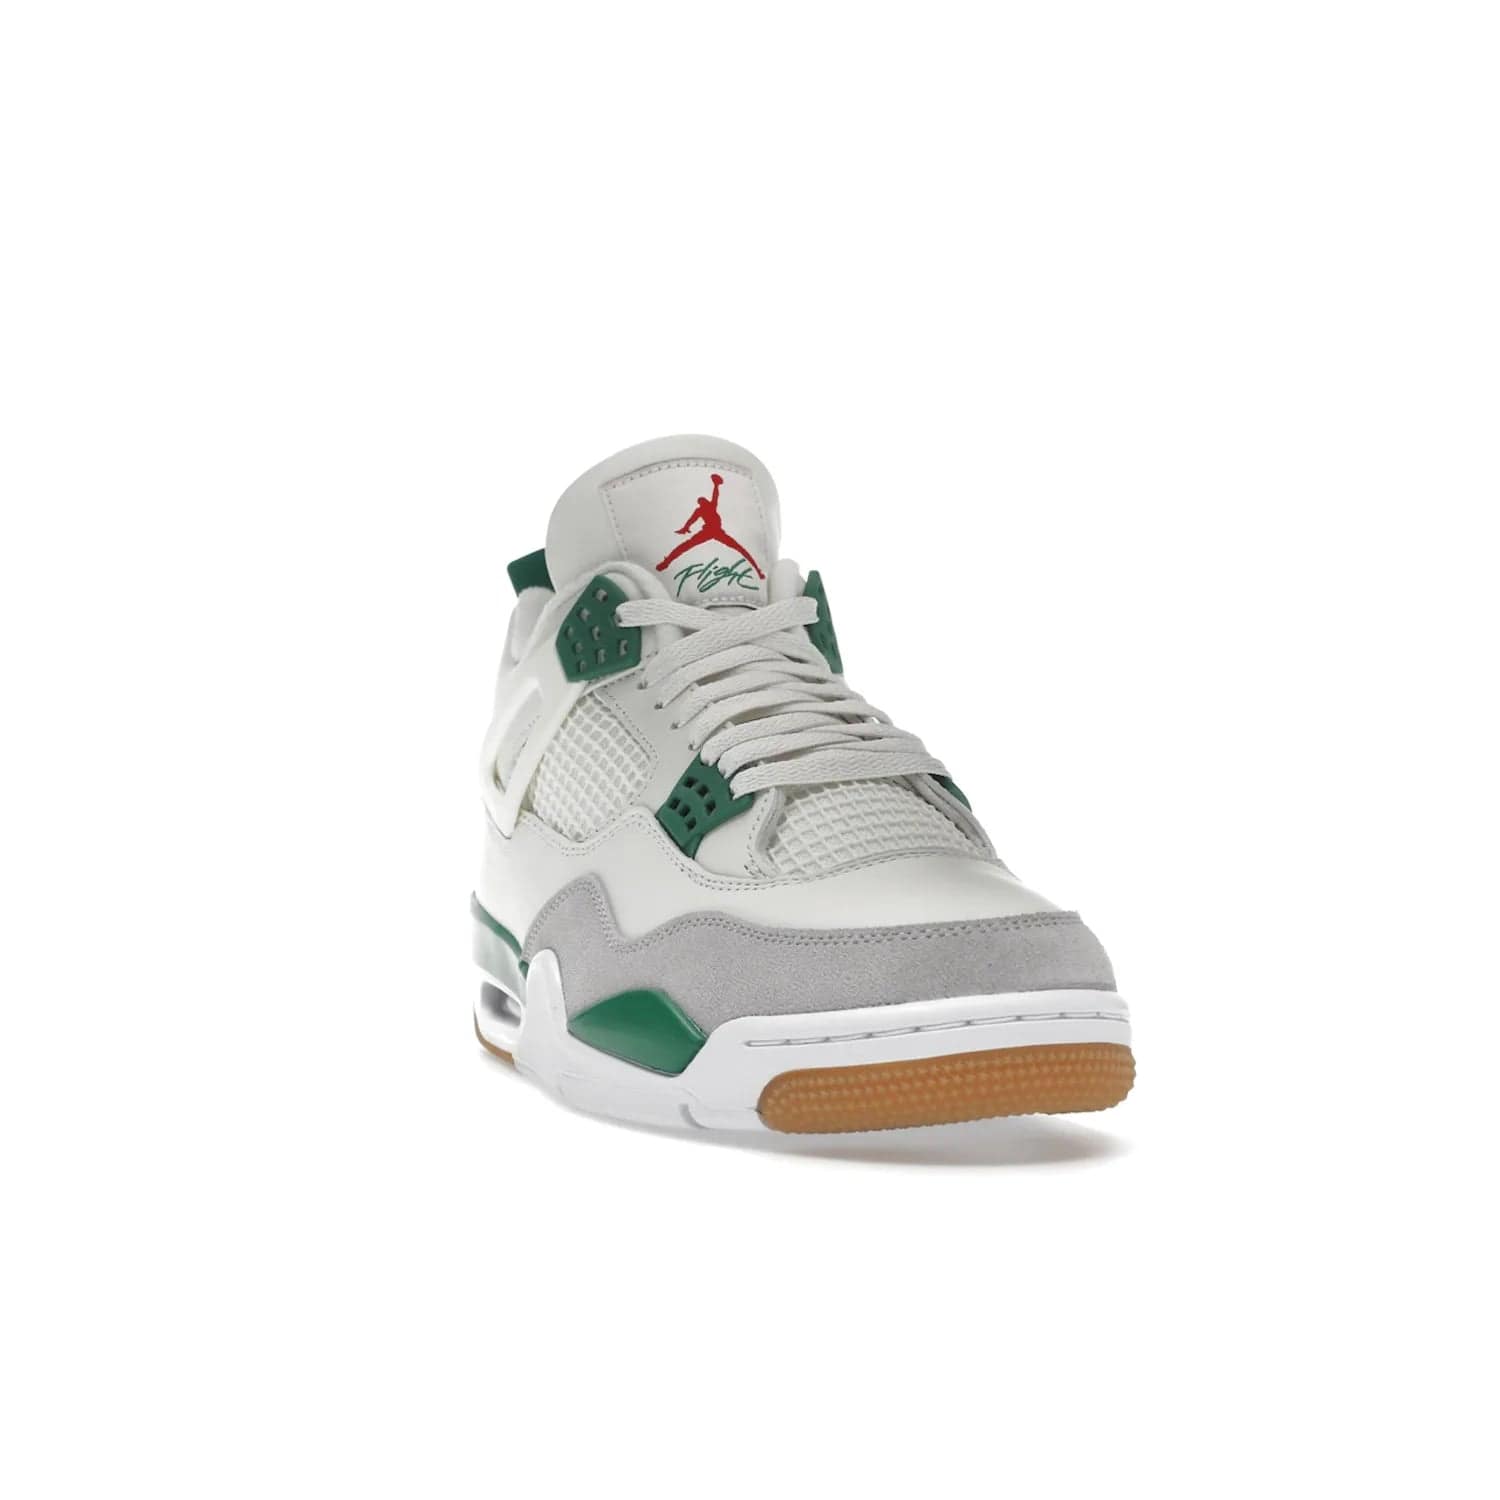 Jordan 4 Retro SB Pine Green - Image 8 - Only at www.BallersClubKickz.com - A white leather upper combined with a Neutral Grey suede mudguard gives this limited Air Jordan 4 Retro SB Pine Green sneaker its unmistakable style. Released March 20, 2023, the Jordan 4 Retro SB features a white and Pine Green midsole plus a red air unit with a gum outsole for grip. The perfect blend of Nike SB skateboarding and Jordan 4 classic design.